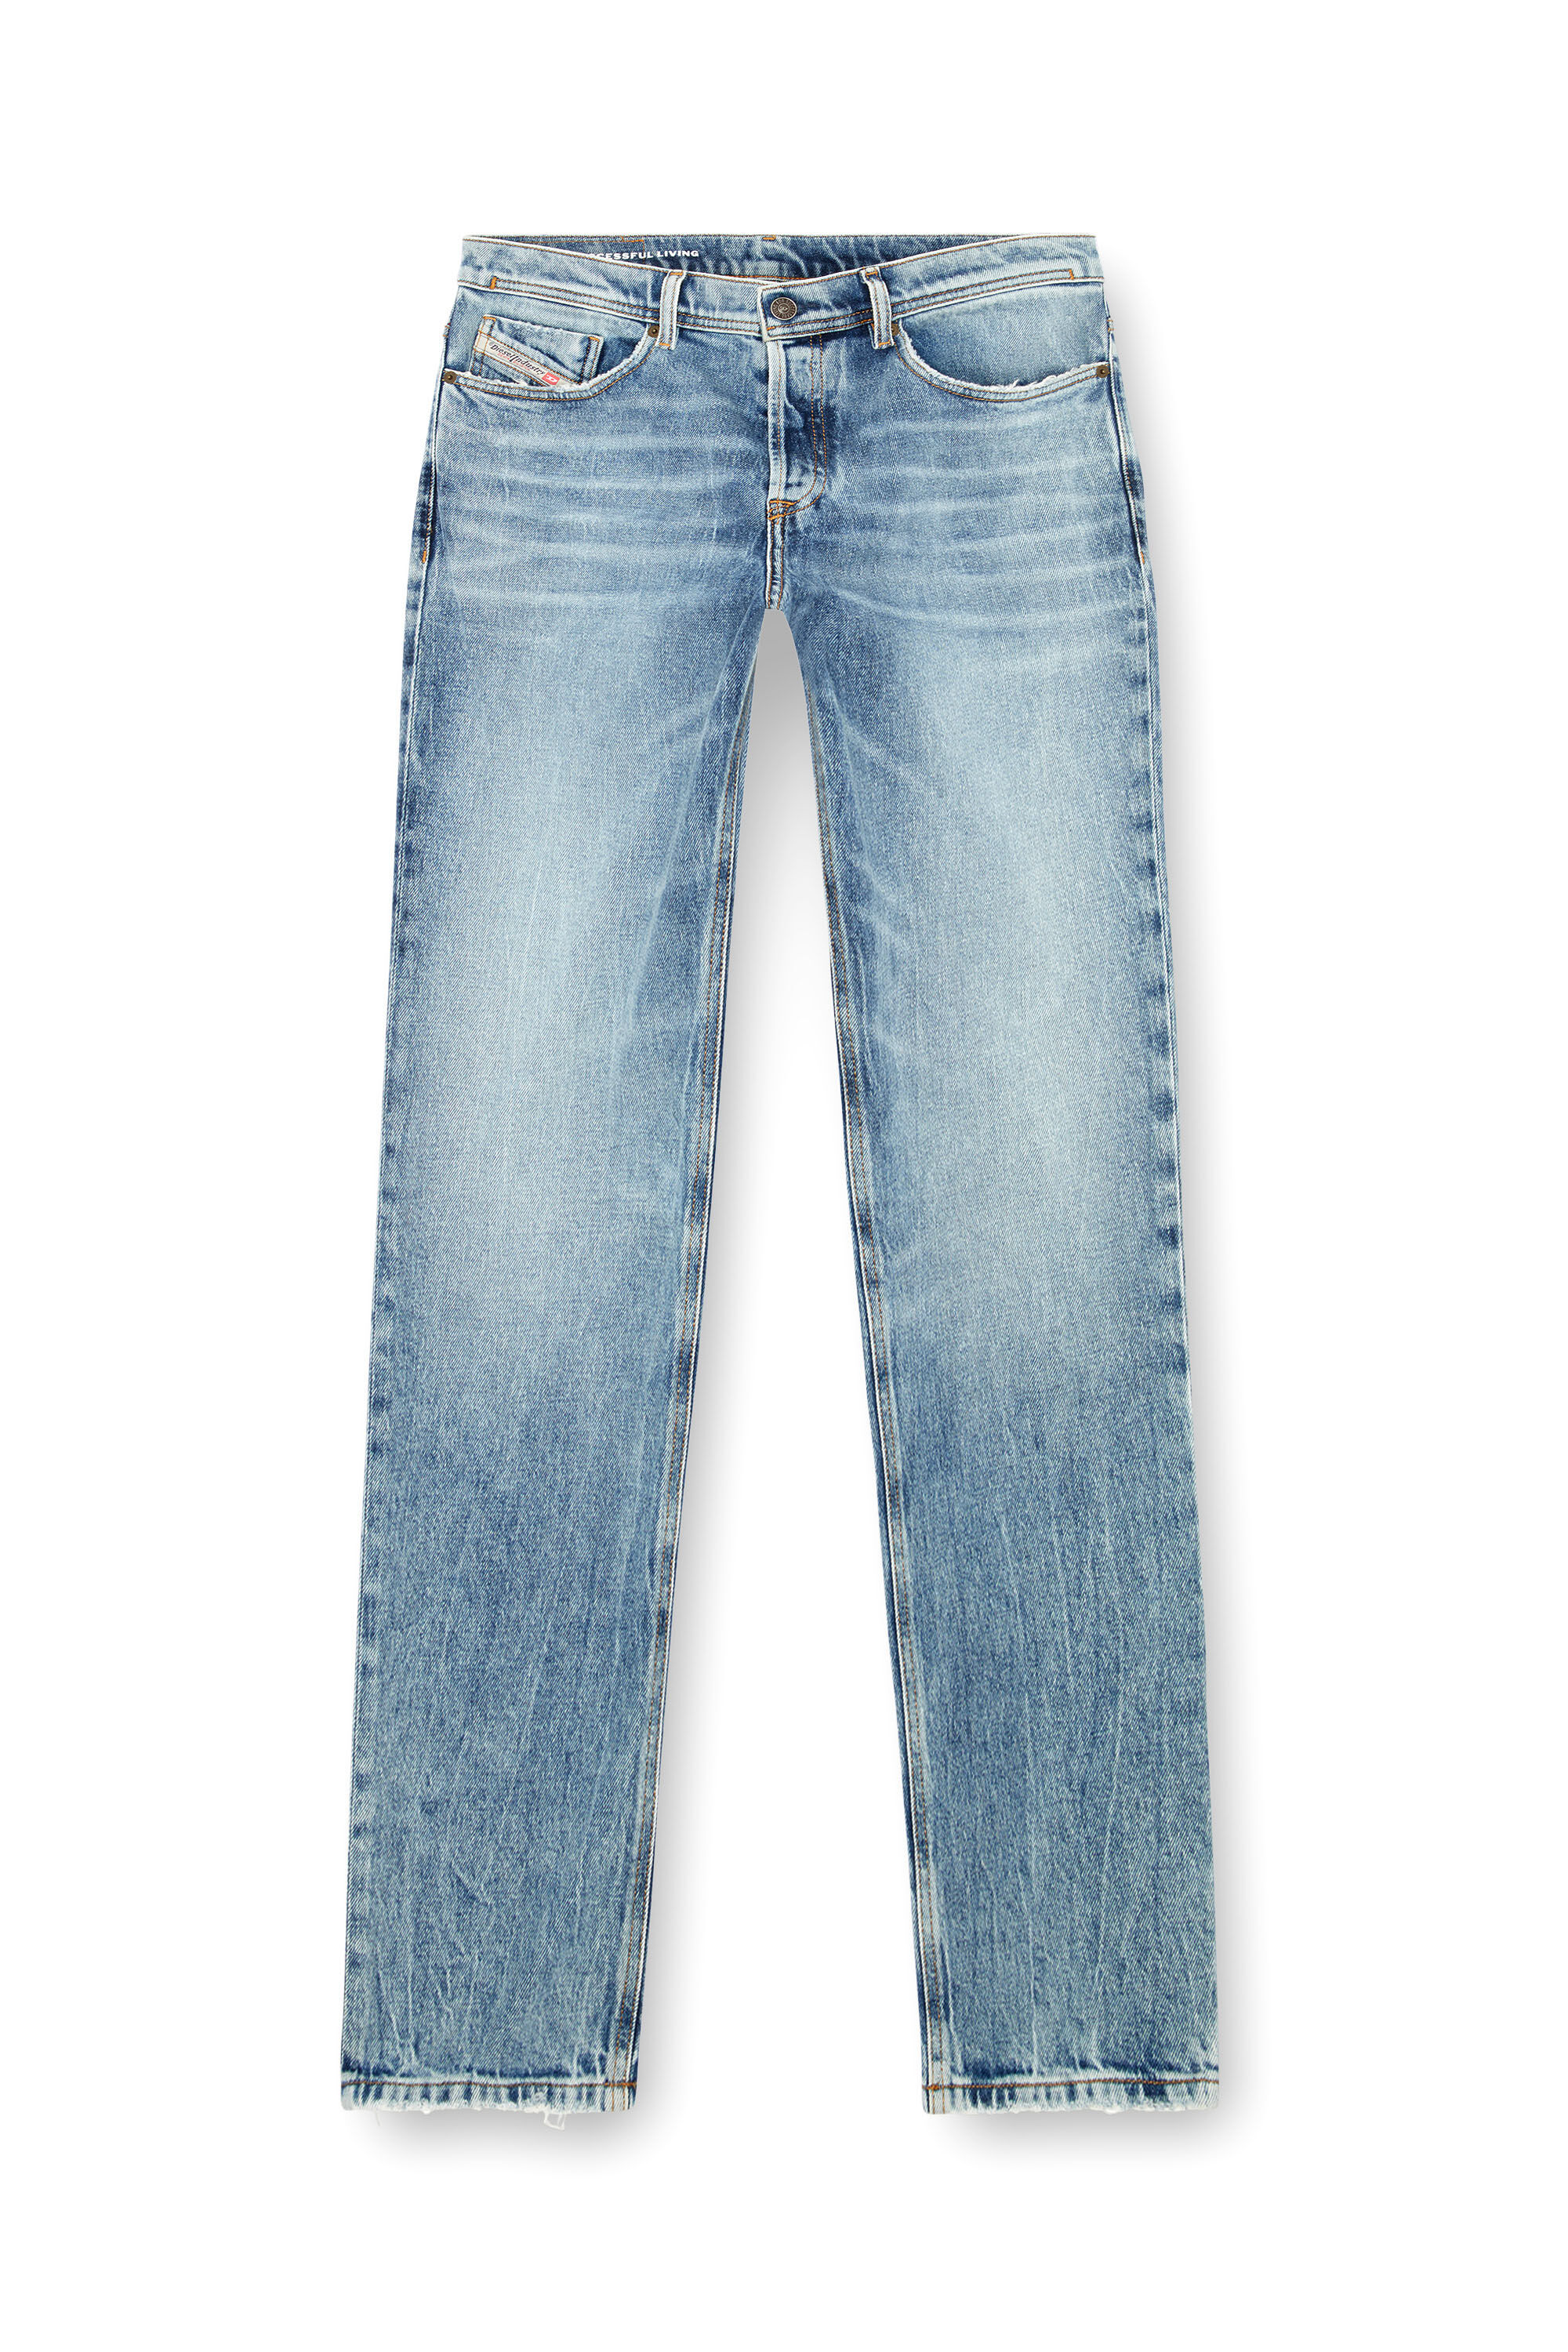 Diesel - Tapered Jeans 2023 D-Finitive 09J54, Hombre Tapered Jeans - 2023 D-Finitive in Azul marino - Image 2